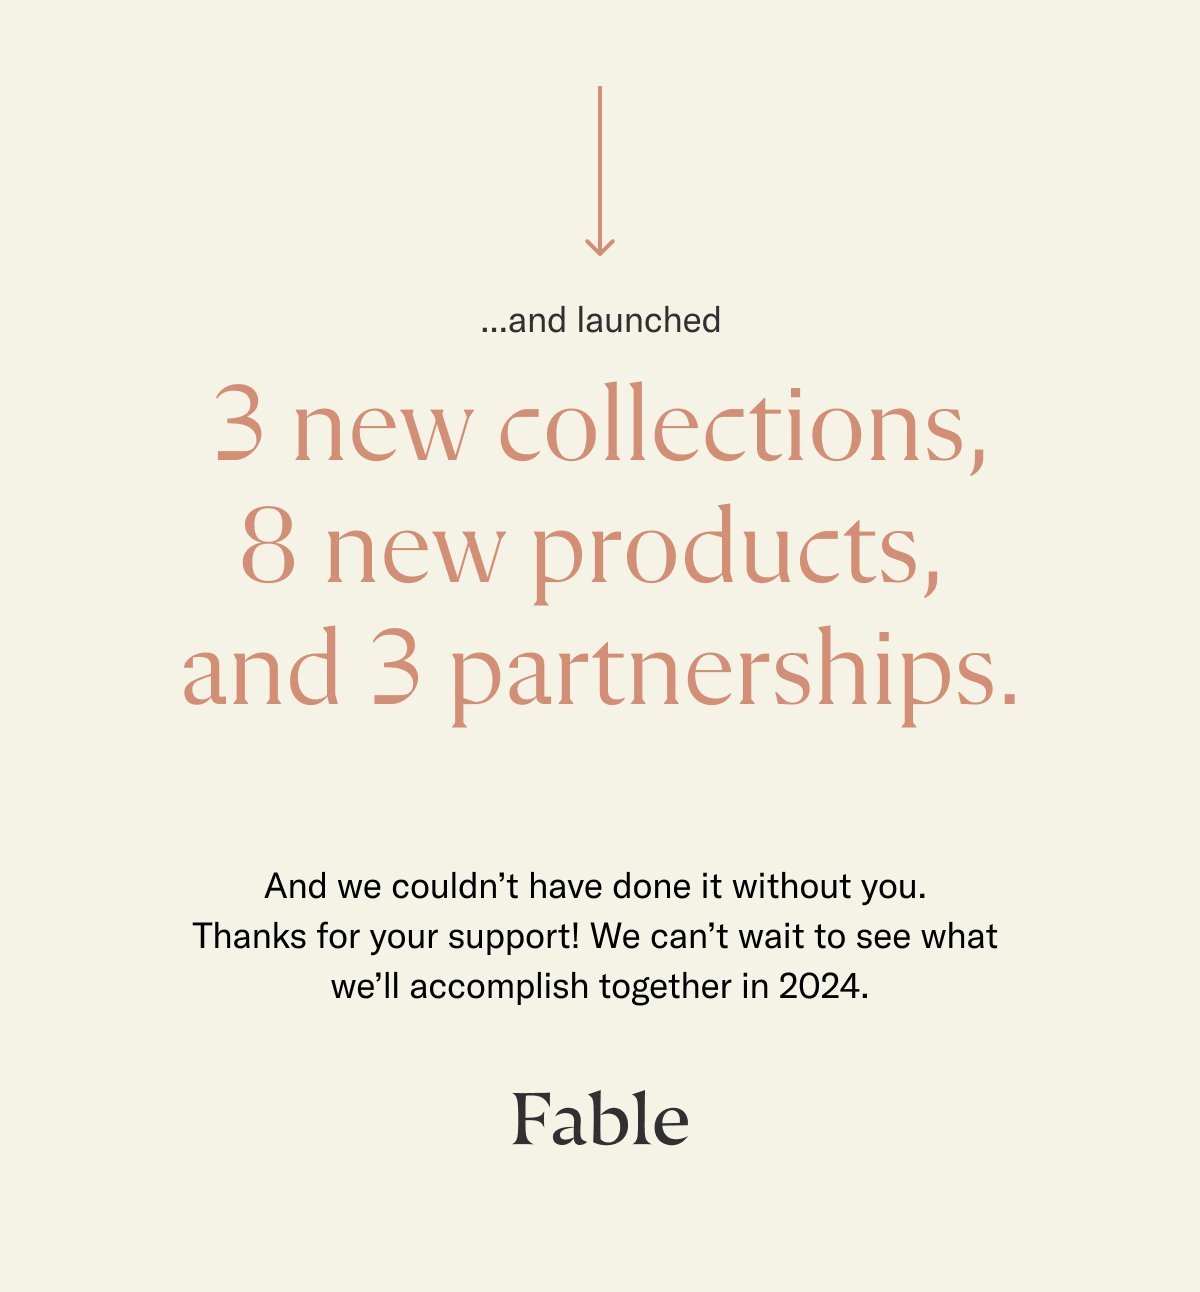 … and launched 3 new collections, 8 new products, and 3 partnerships. And we couldn’t have done it without you. Thanks for your support! We can’t wait to see what we’ll accomplish together in 2024.